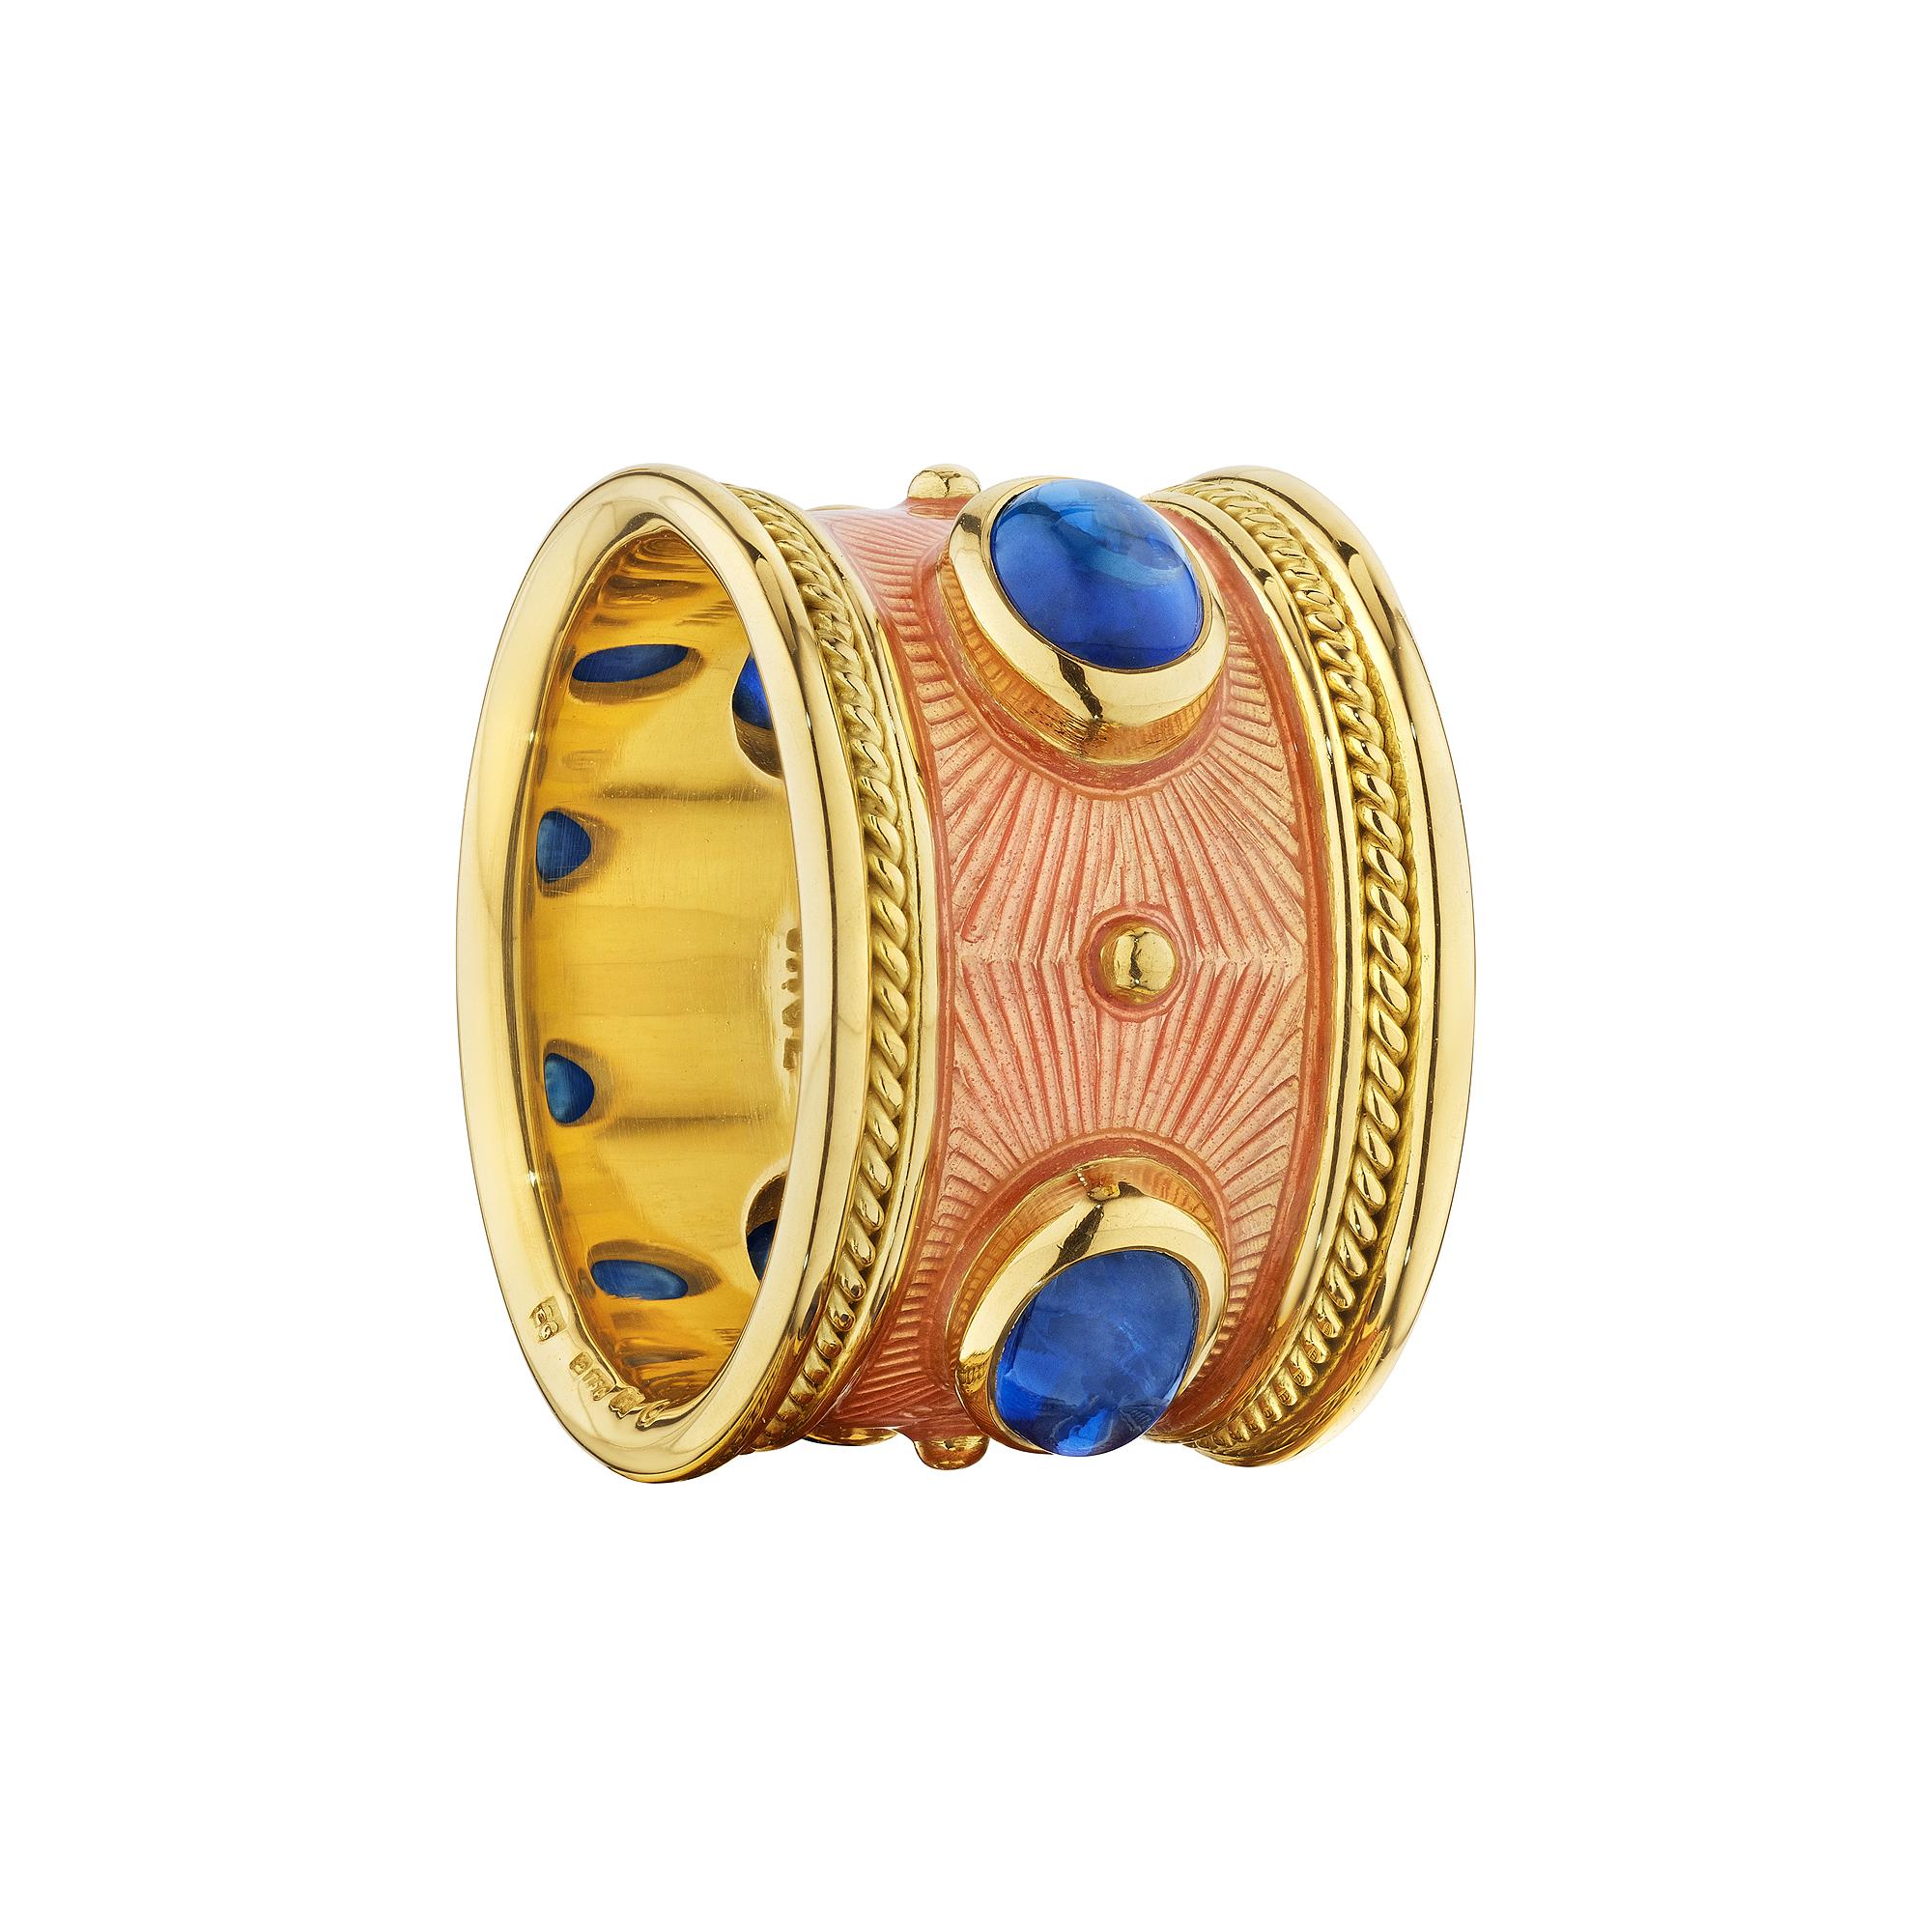 Vivid blue oval cut cabochon sapphires juxtaposed against luscious salmon pink enamel, makes this Elizabeth Gage 18 karat yellow gold band ring burst with unexpected color.  Approximate sapphire weight 2.50 carats.  Circa 2000.  Signed EG.  Size  6